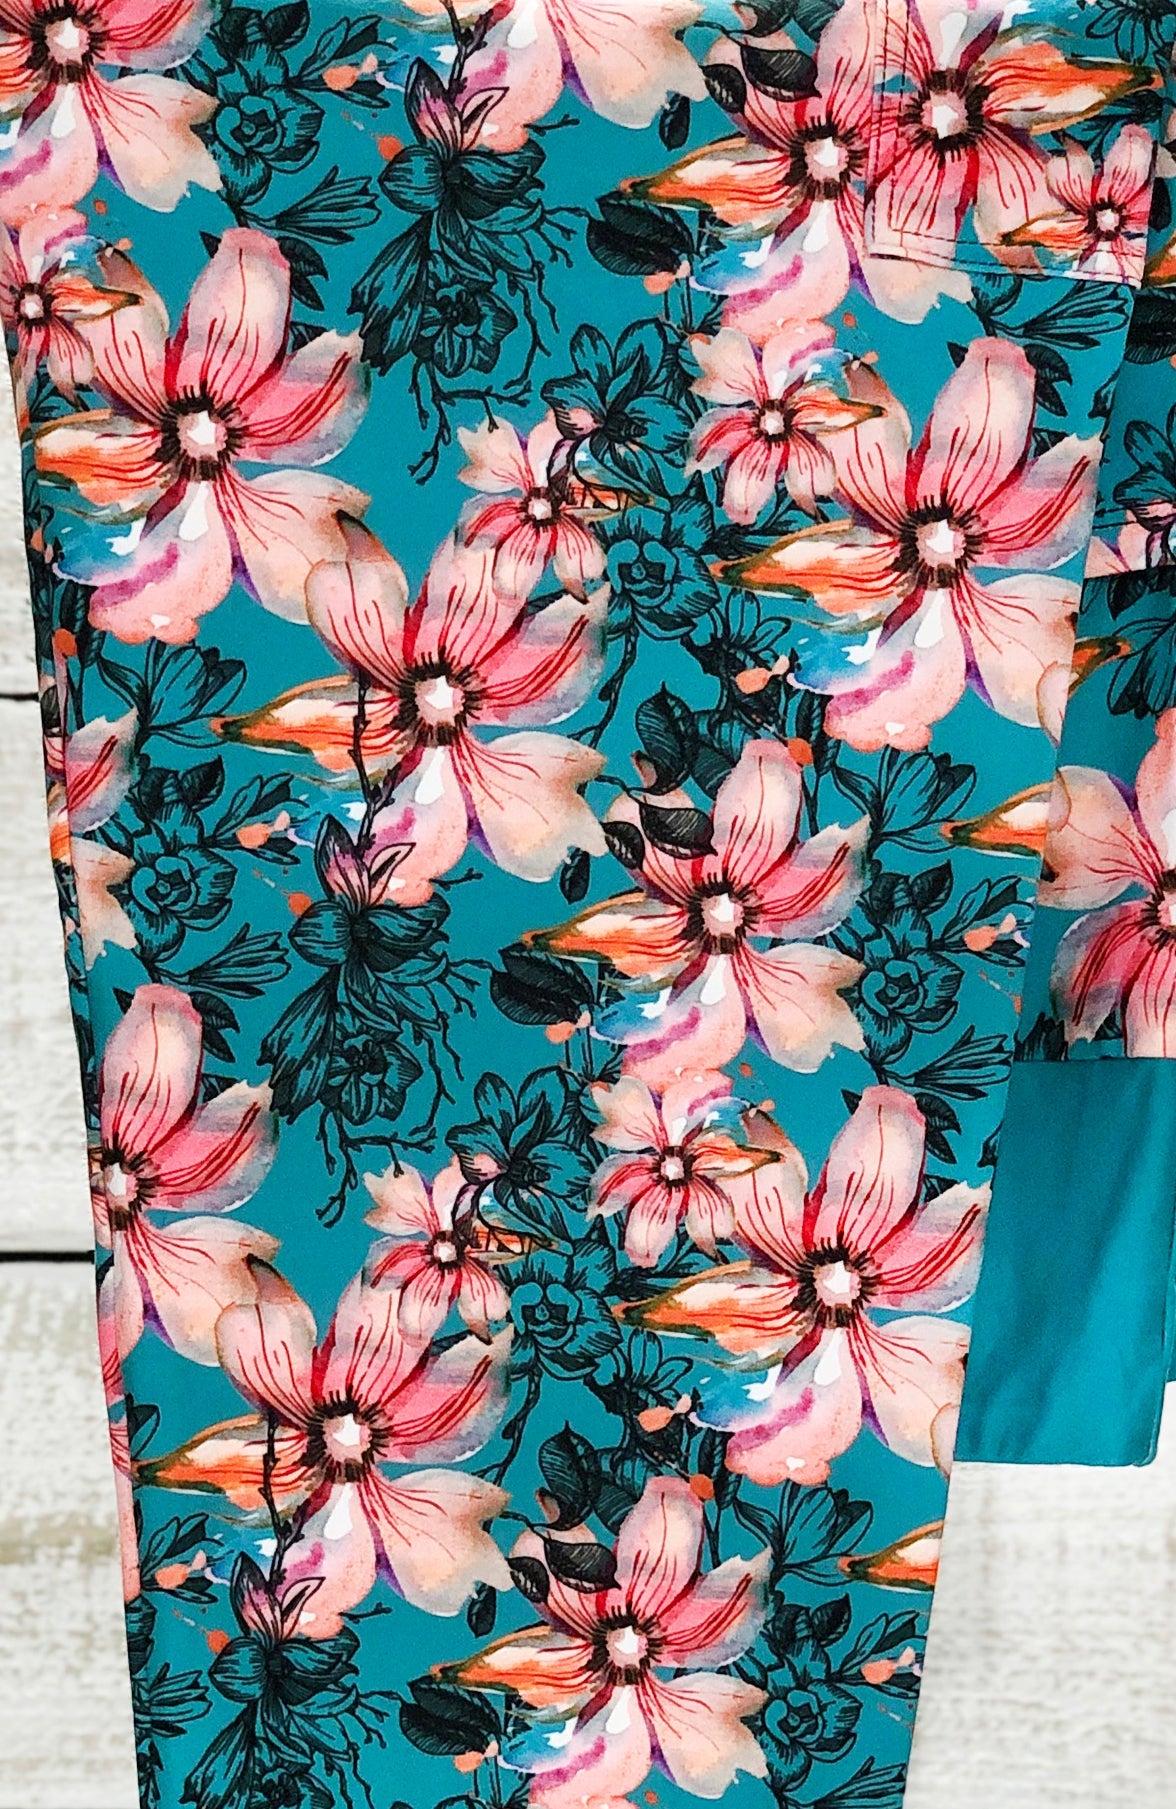 RTS - Teal Watercolor Floral Leggings w/ Pockets